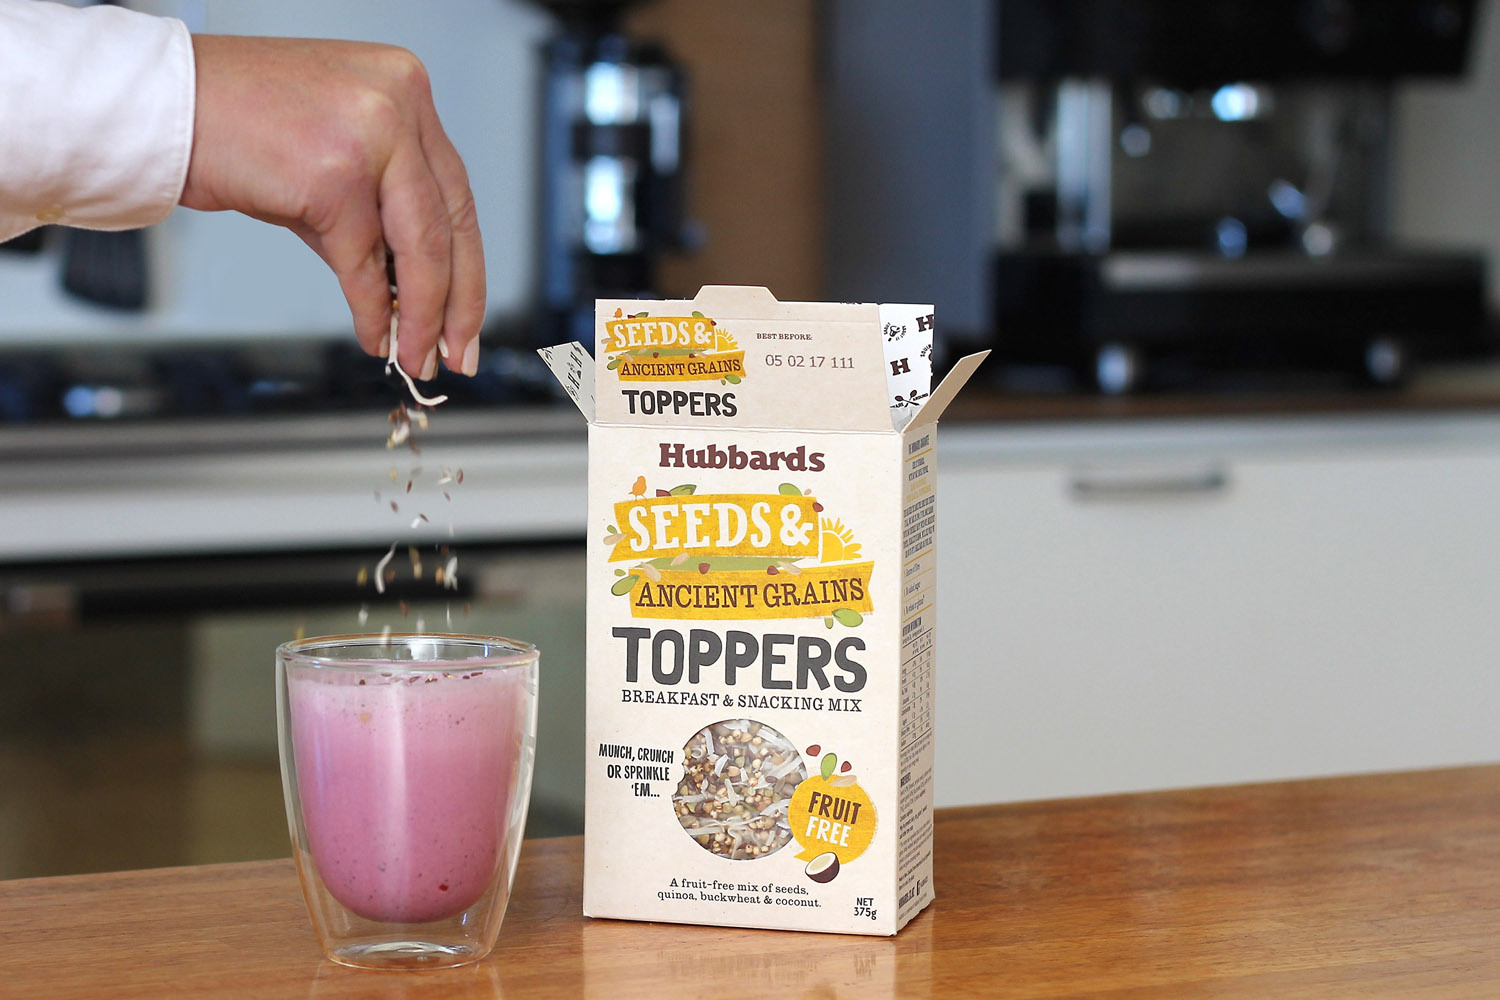 New packaging for Hubbards Toppers by Coats Design, New Zealand